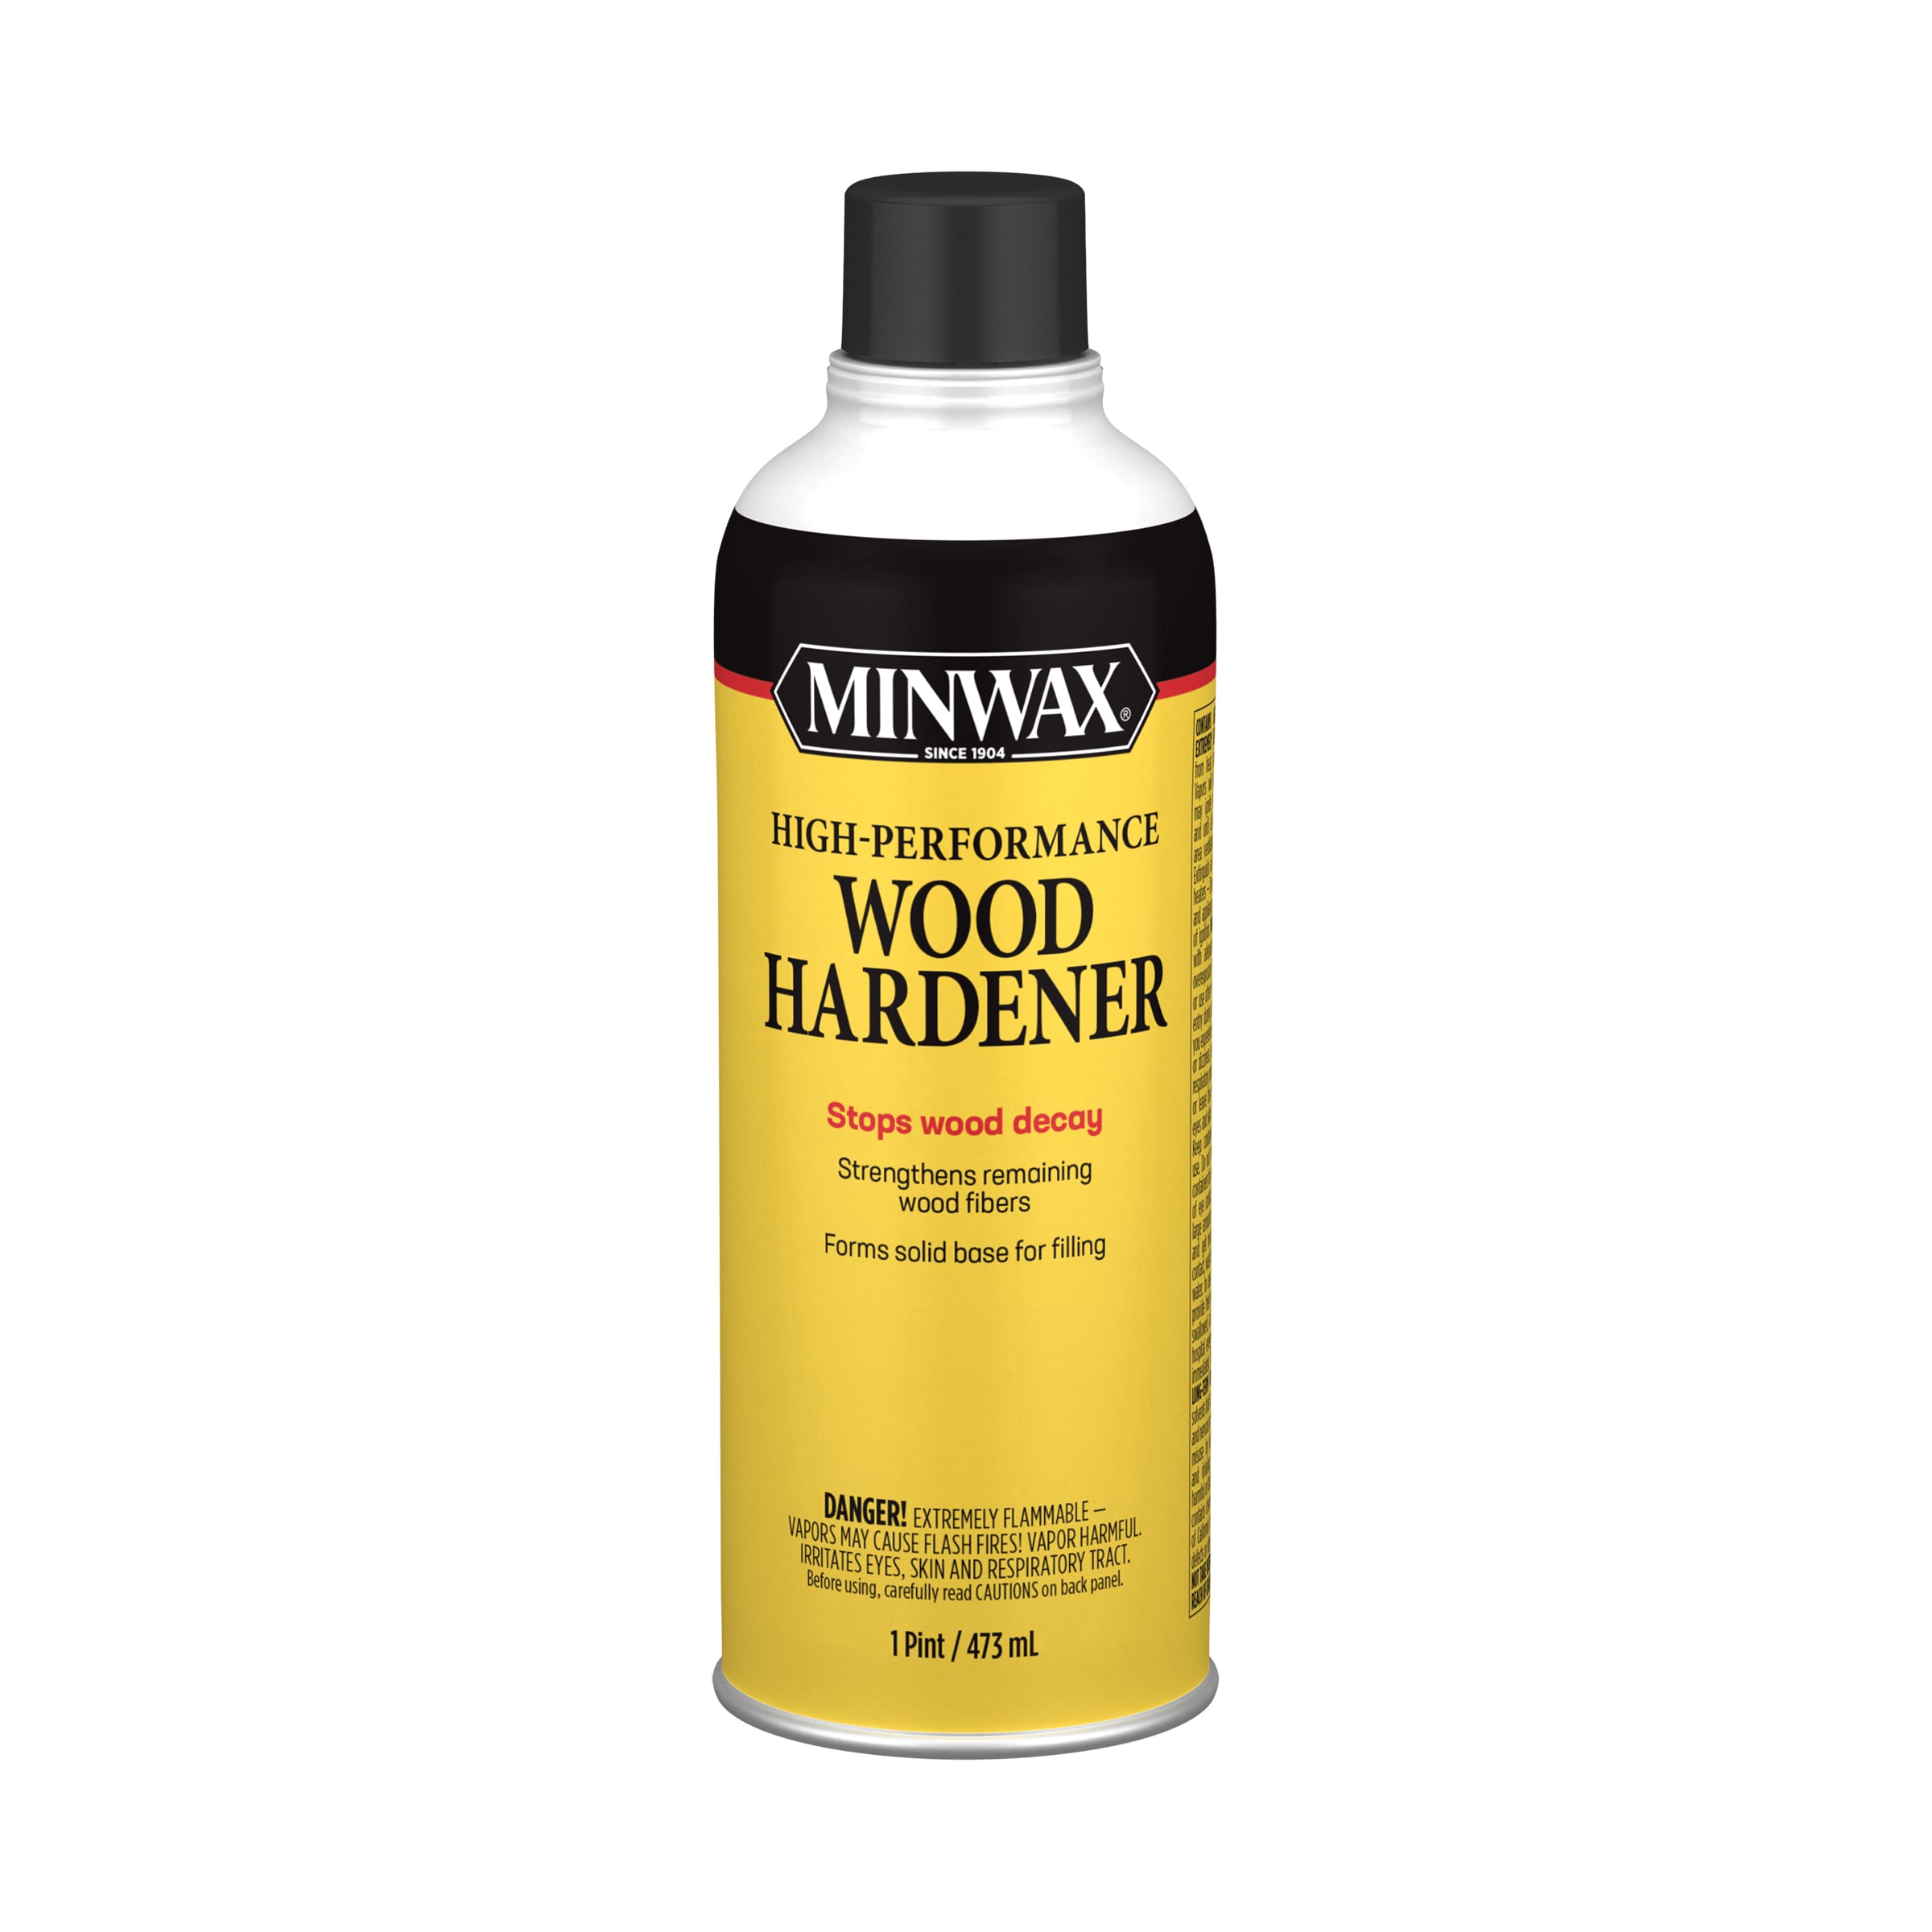 Question on Minwax wood hardener - Fit and Finish - Bladesmith's